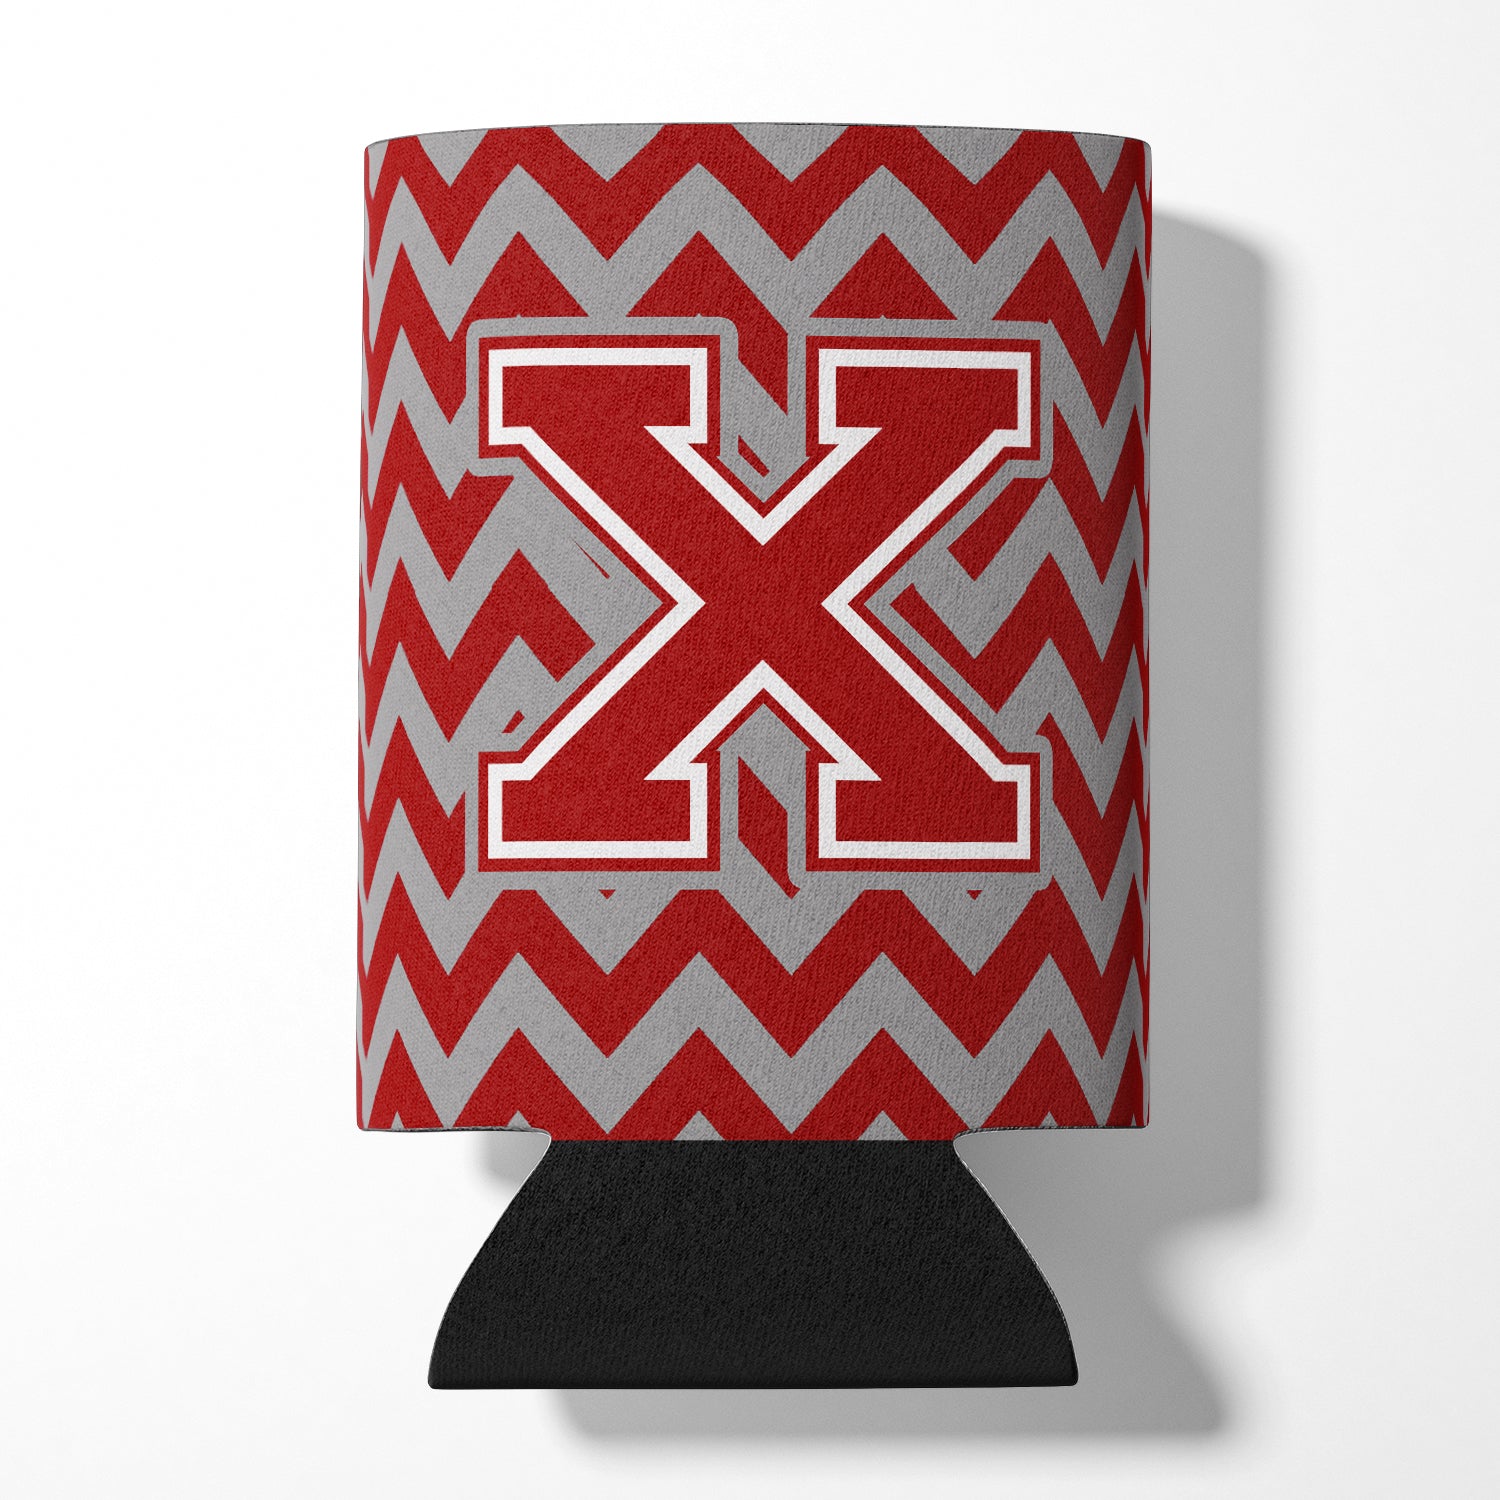 Letter X Chevron Maroon and White Can or Bottle Hugger CJ1049-XCC.